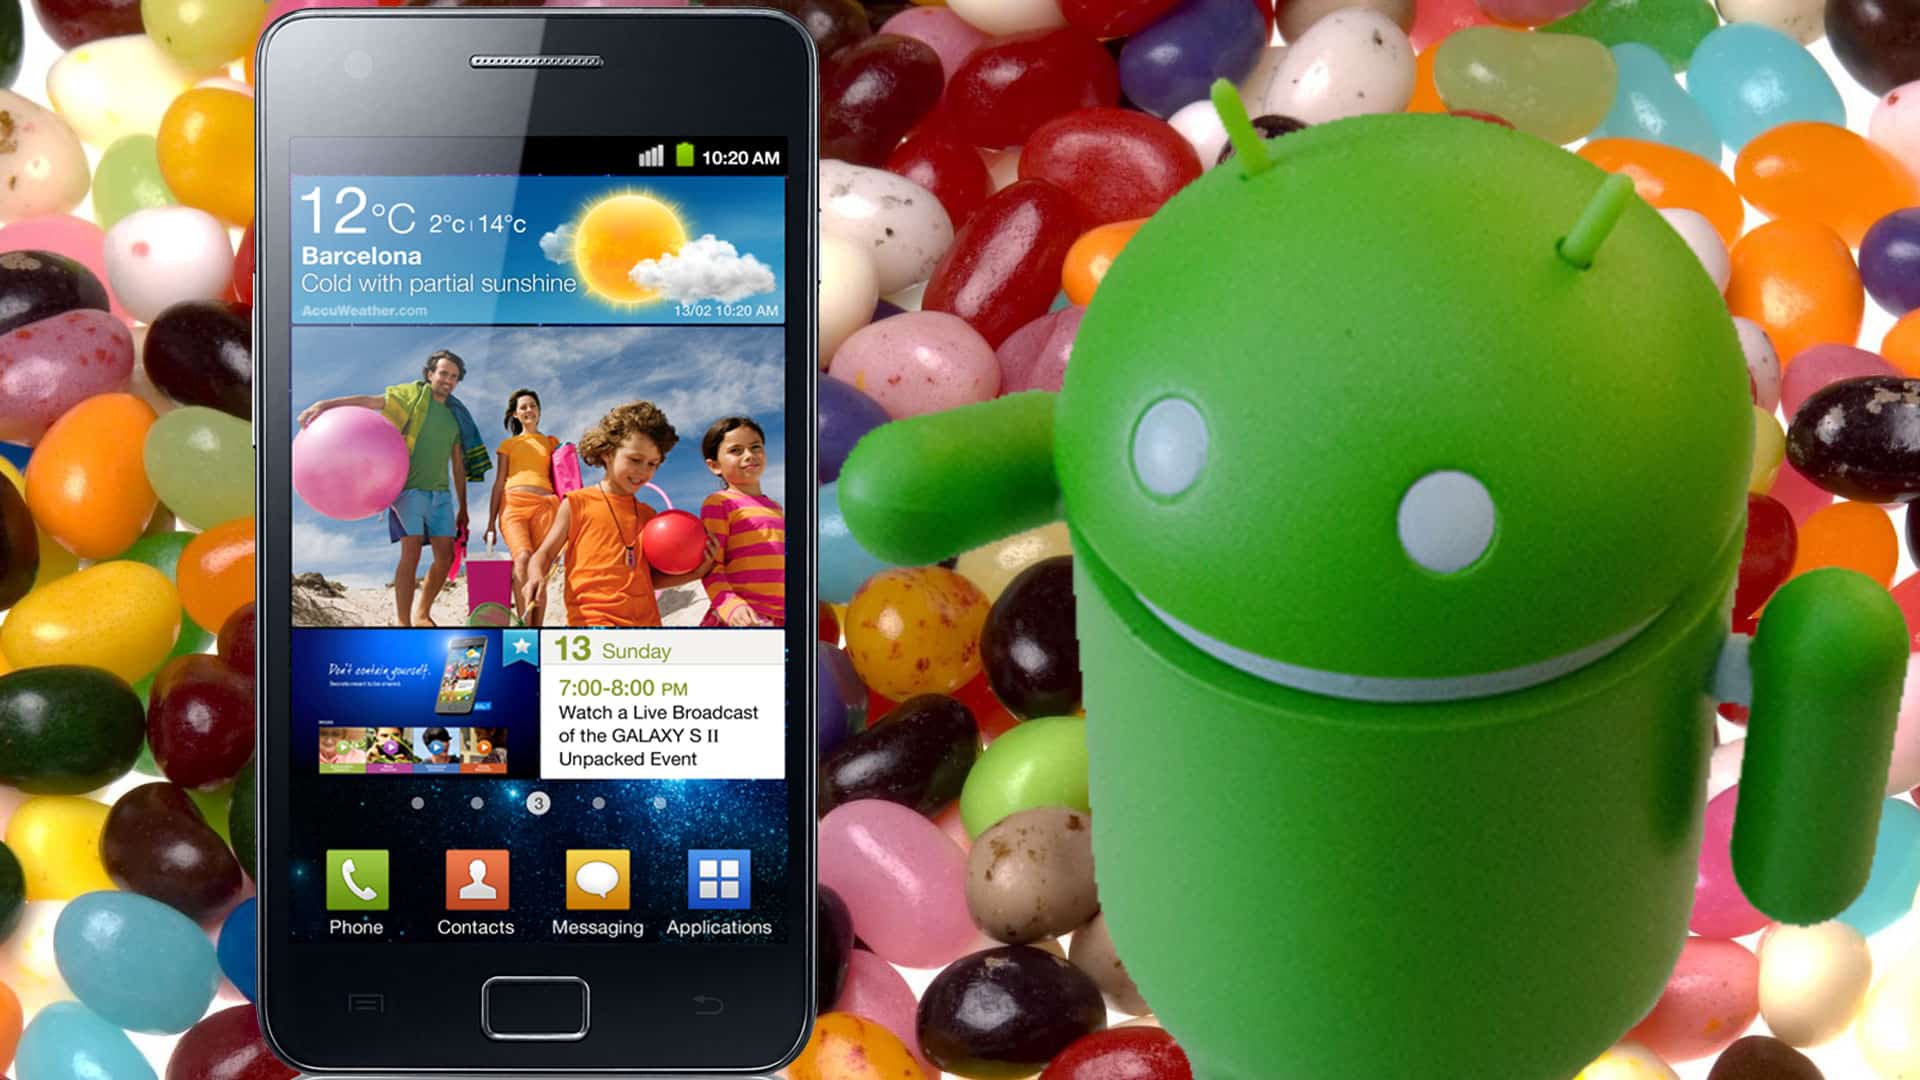 Jelly bean leaks. Samsung Galaxy s2 Android Jelly Bean. Android Jelly Bean телефон самсунг. Android 4.2 Jelly Bean. Android 4.1 Jelly Bean.